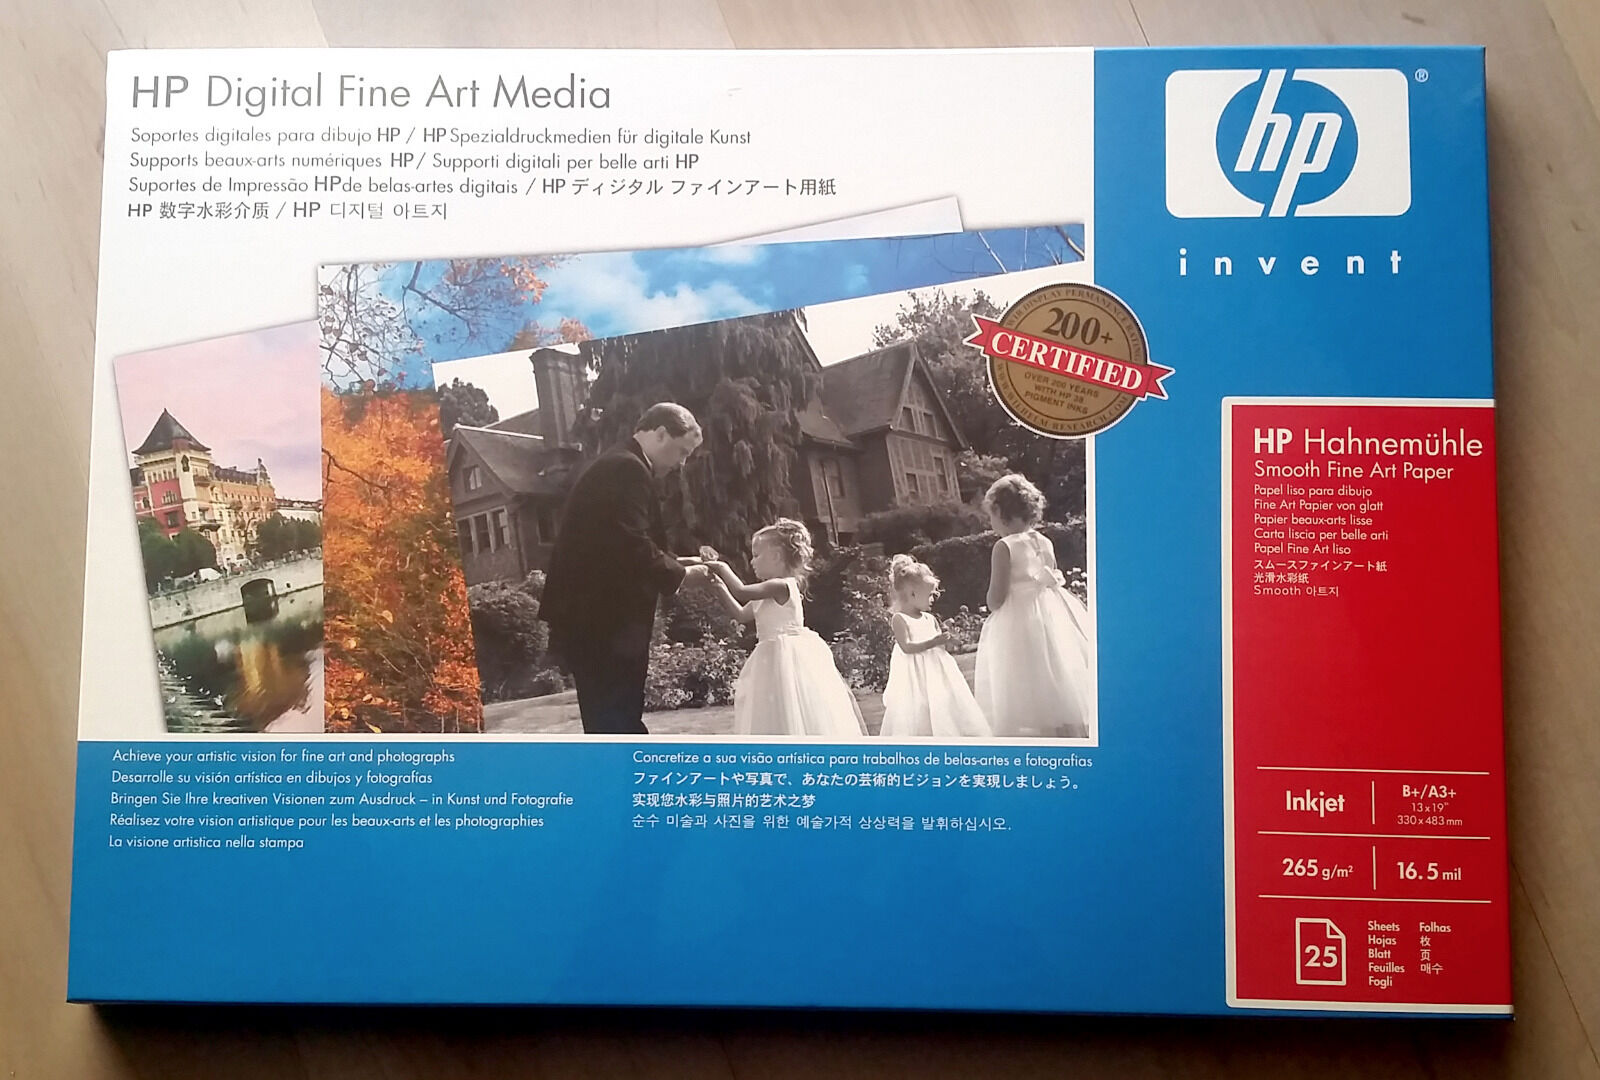 HP Hahnemuhle Smooth Fine Art Paper 13X19 - NEW SEALED - Hewlett Packard Q8728A